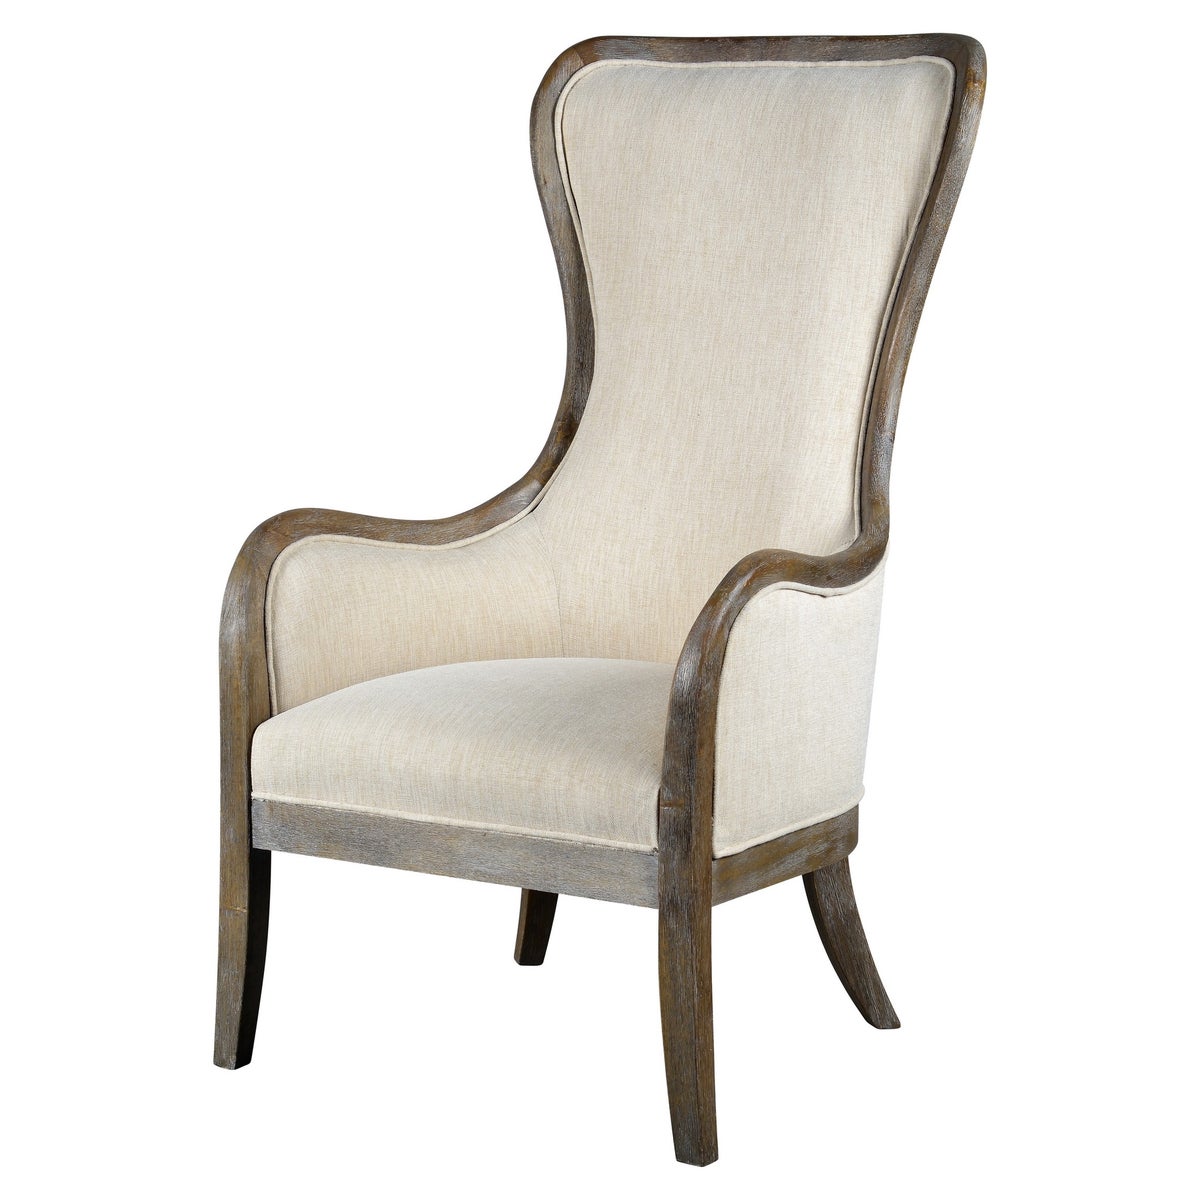 -Cleveland Chair (French Linen)